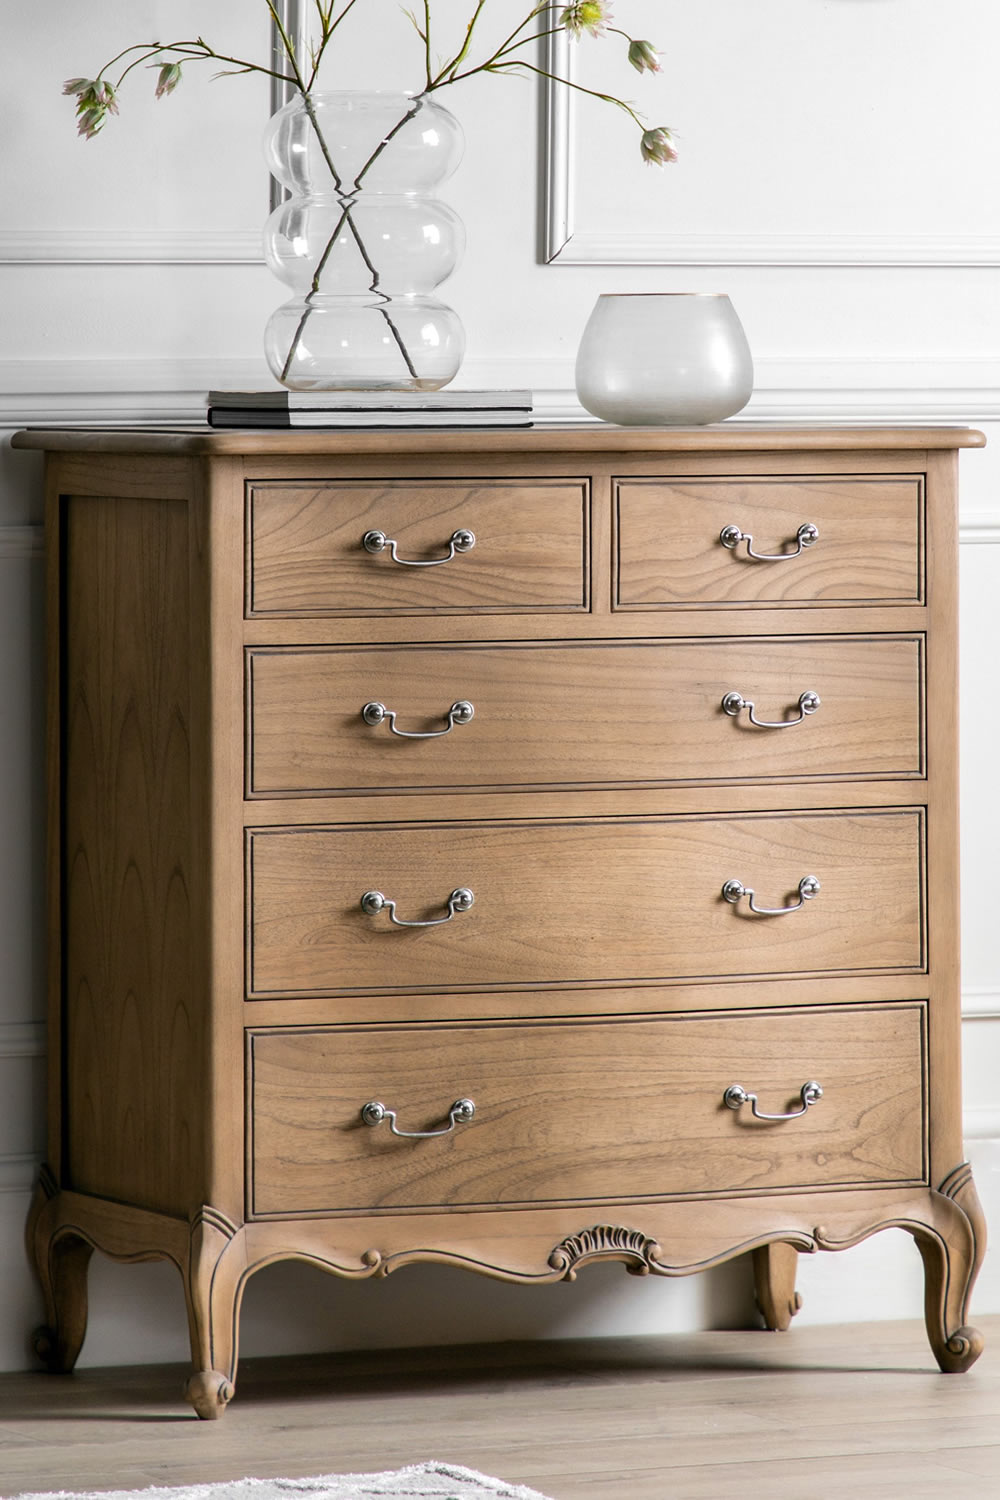 View Chic 5 Drawer Chest Weathered Tall Bedroom Storage Unit With Sliding Drawers Crafted From Solid Mindy Ash Traditional French Furniture Design information